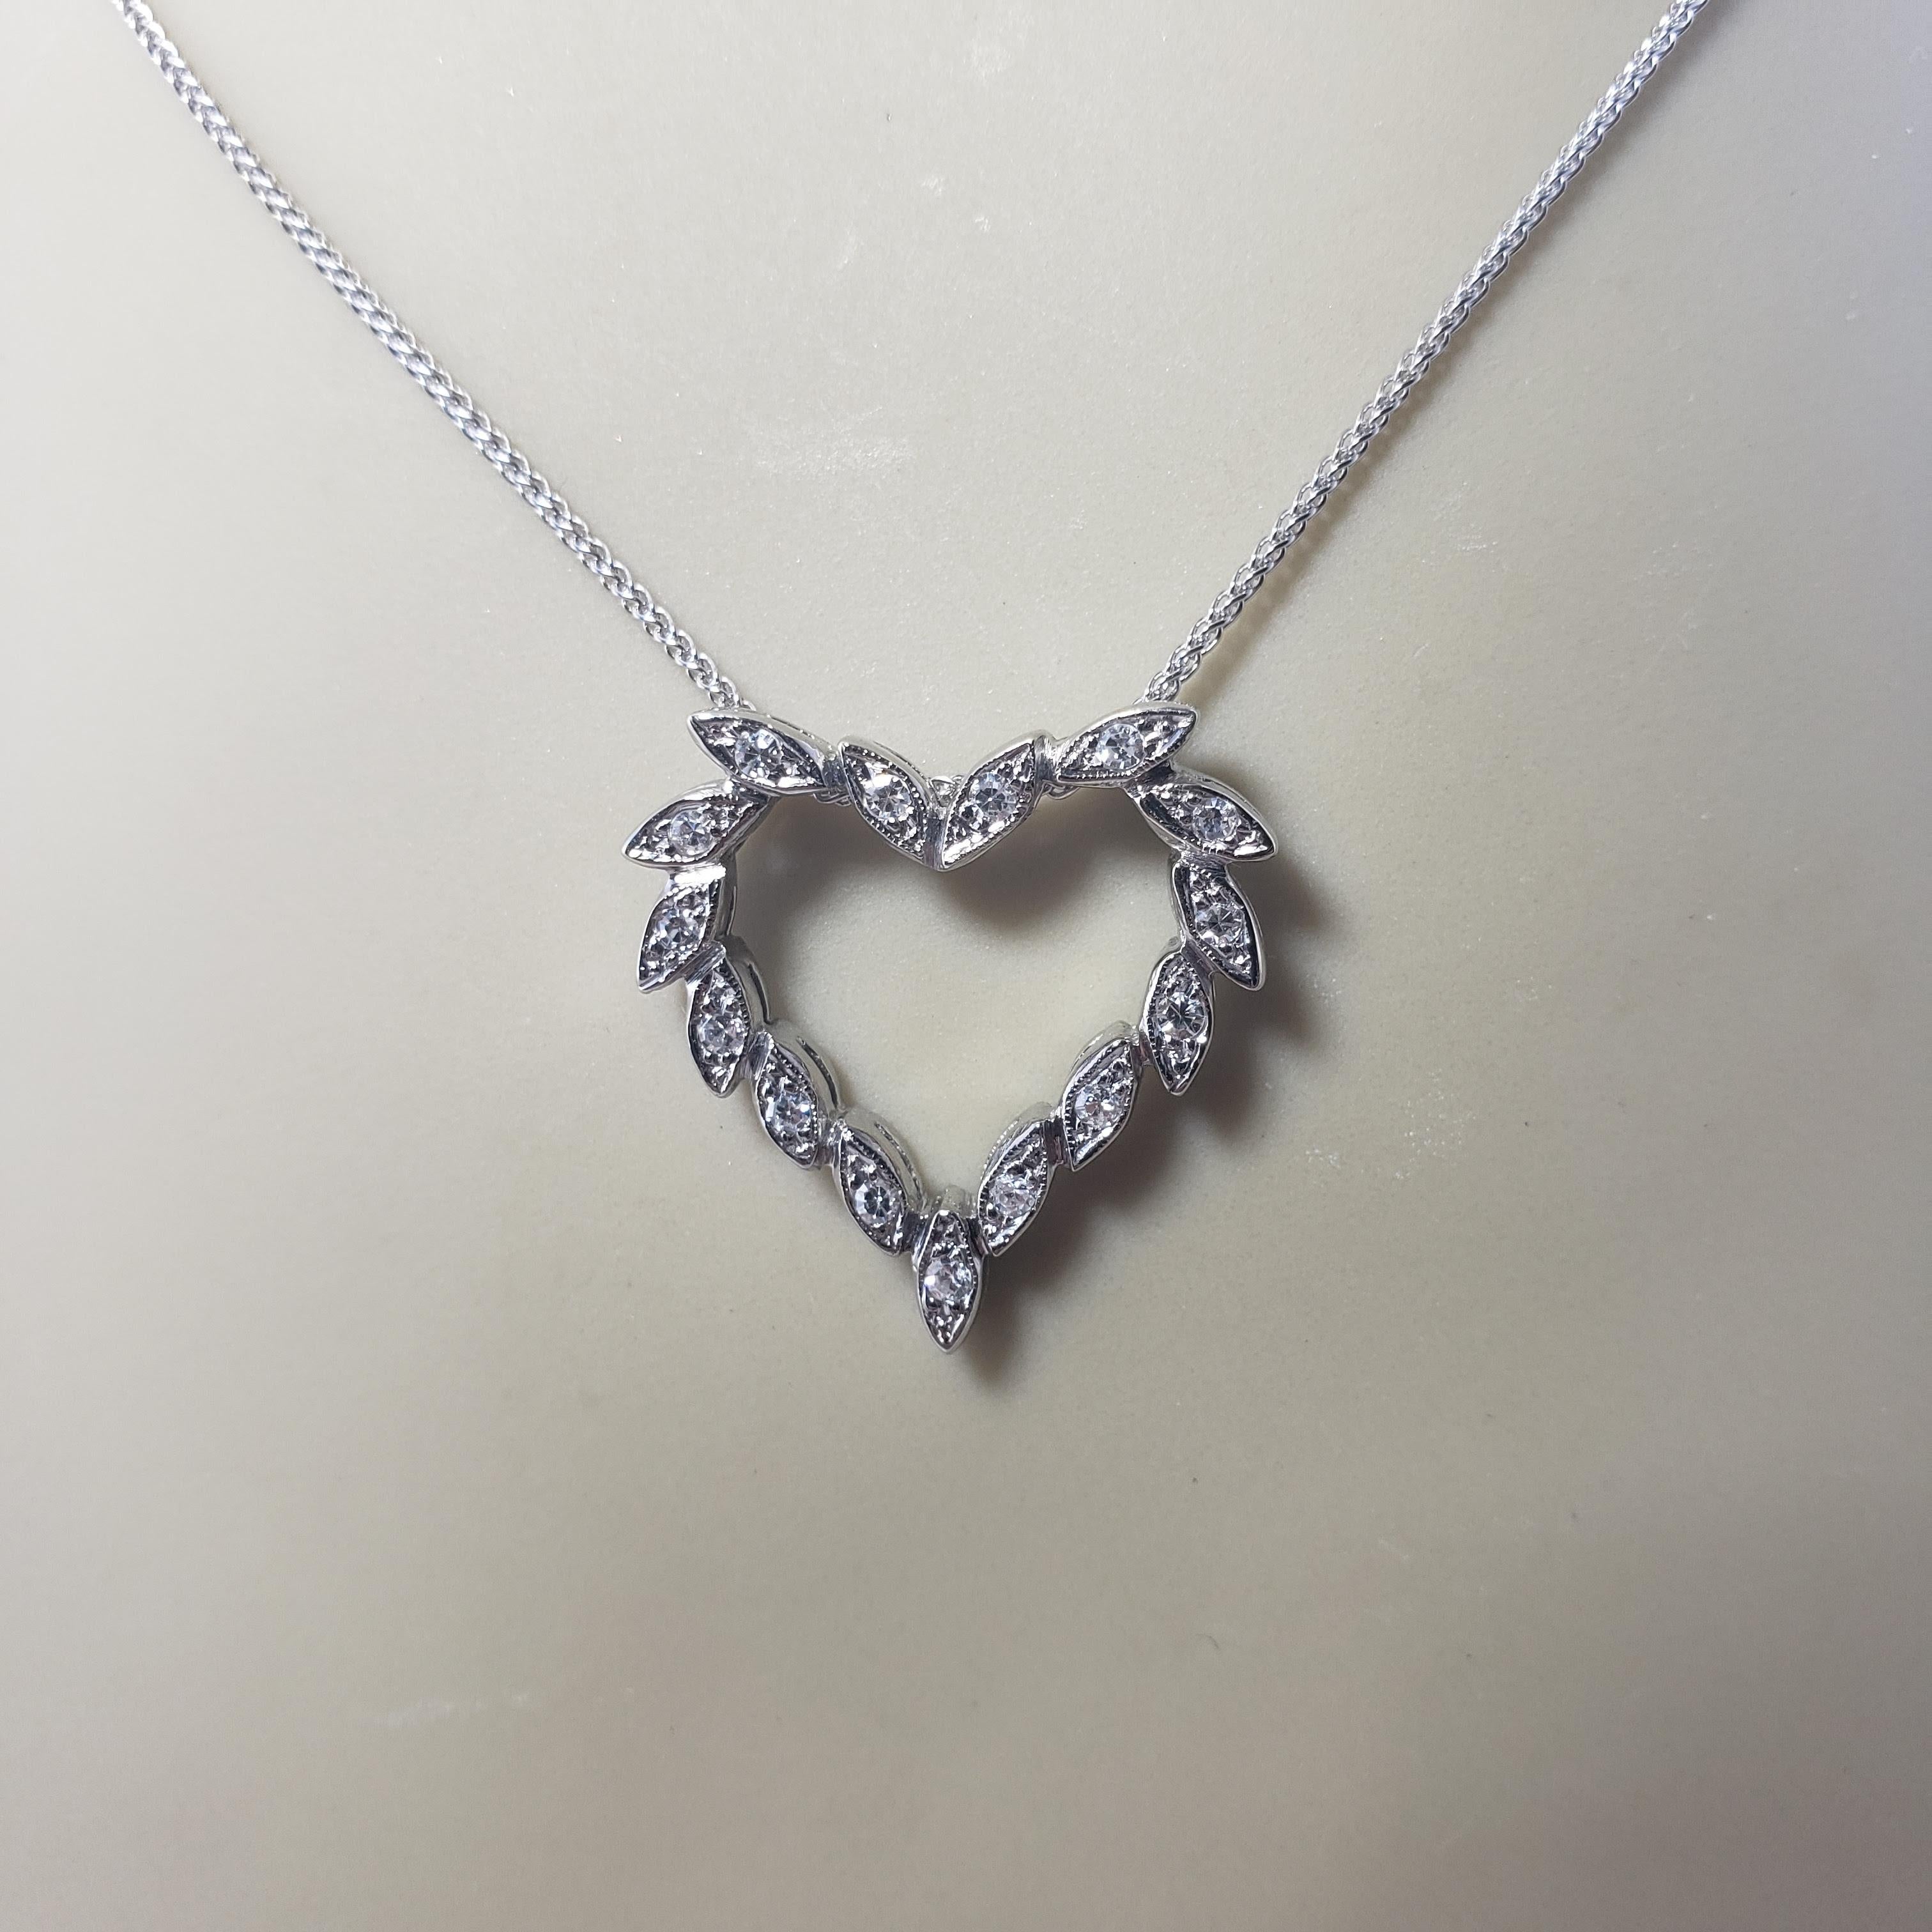 Vintage 14 Karat White Gold Diamond Heart Pendant Necklace-

This sparkling heart pendant features 15 round single cut diamonds set in classic 14K white gold. Suspends from a classic cable necklace.

Approximate total diamond weight: .15